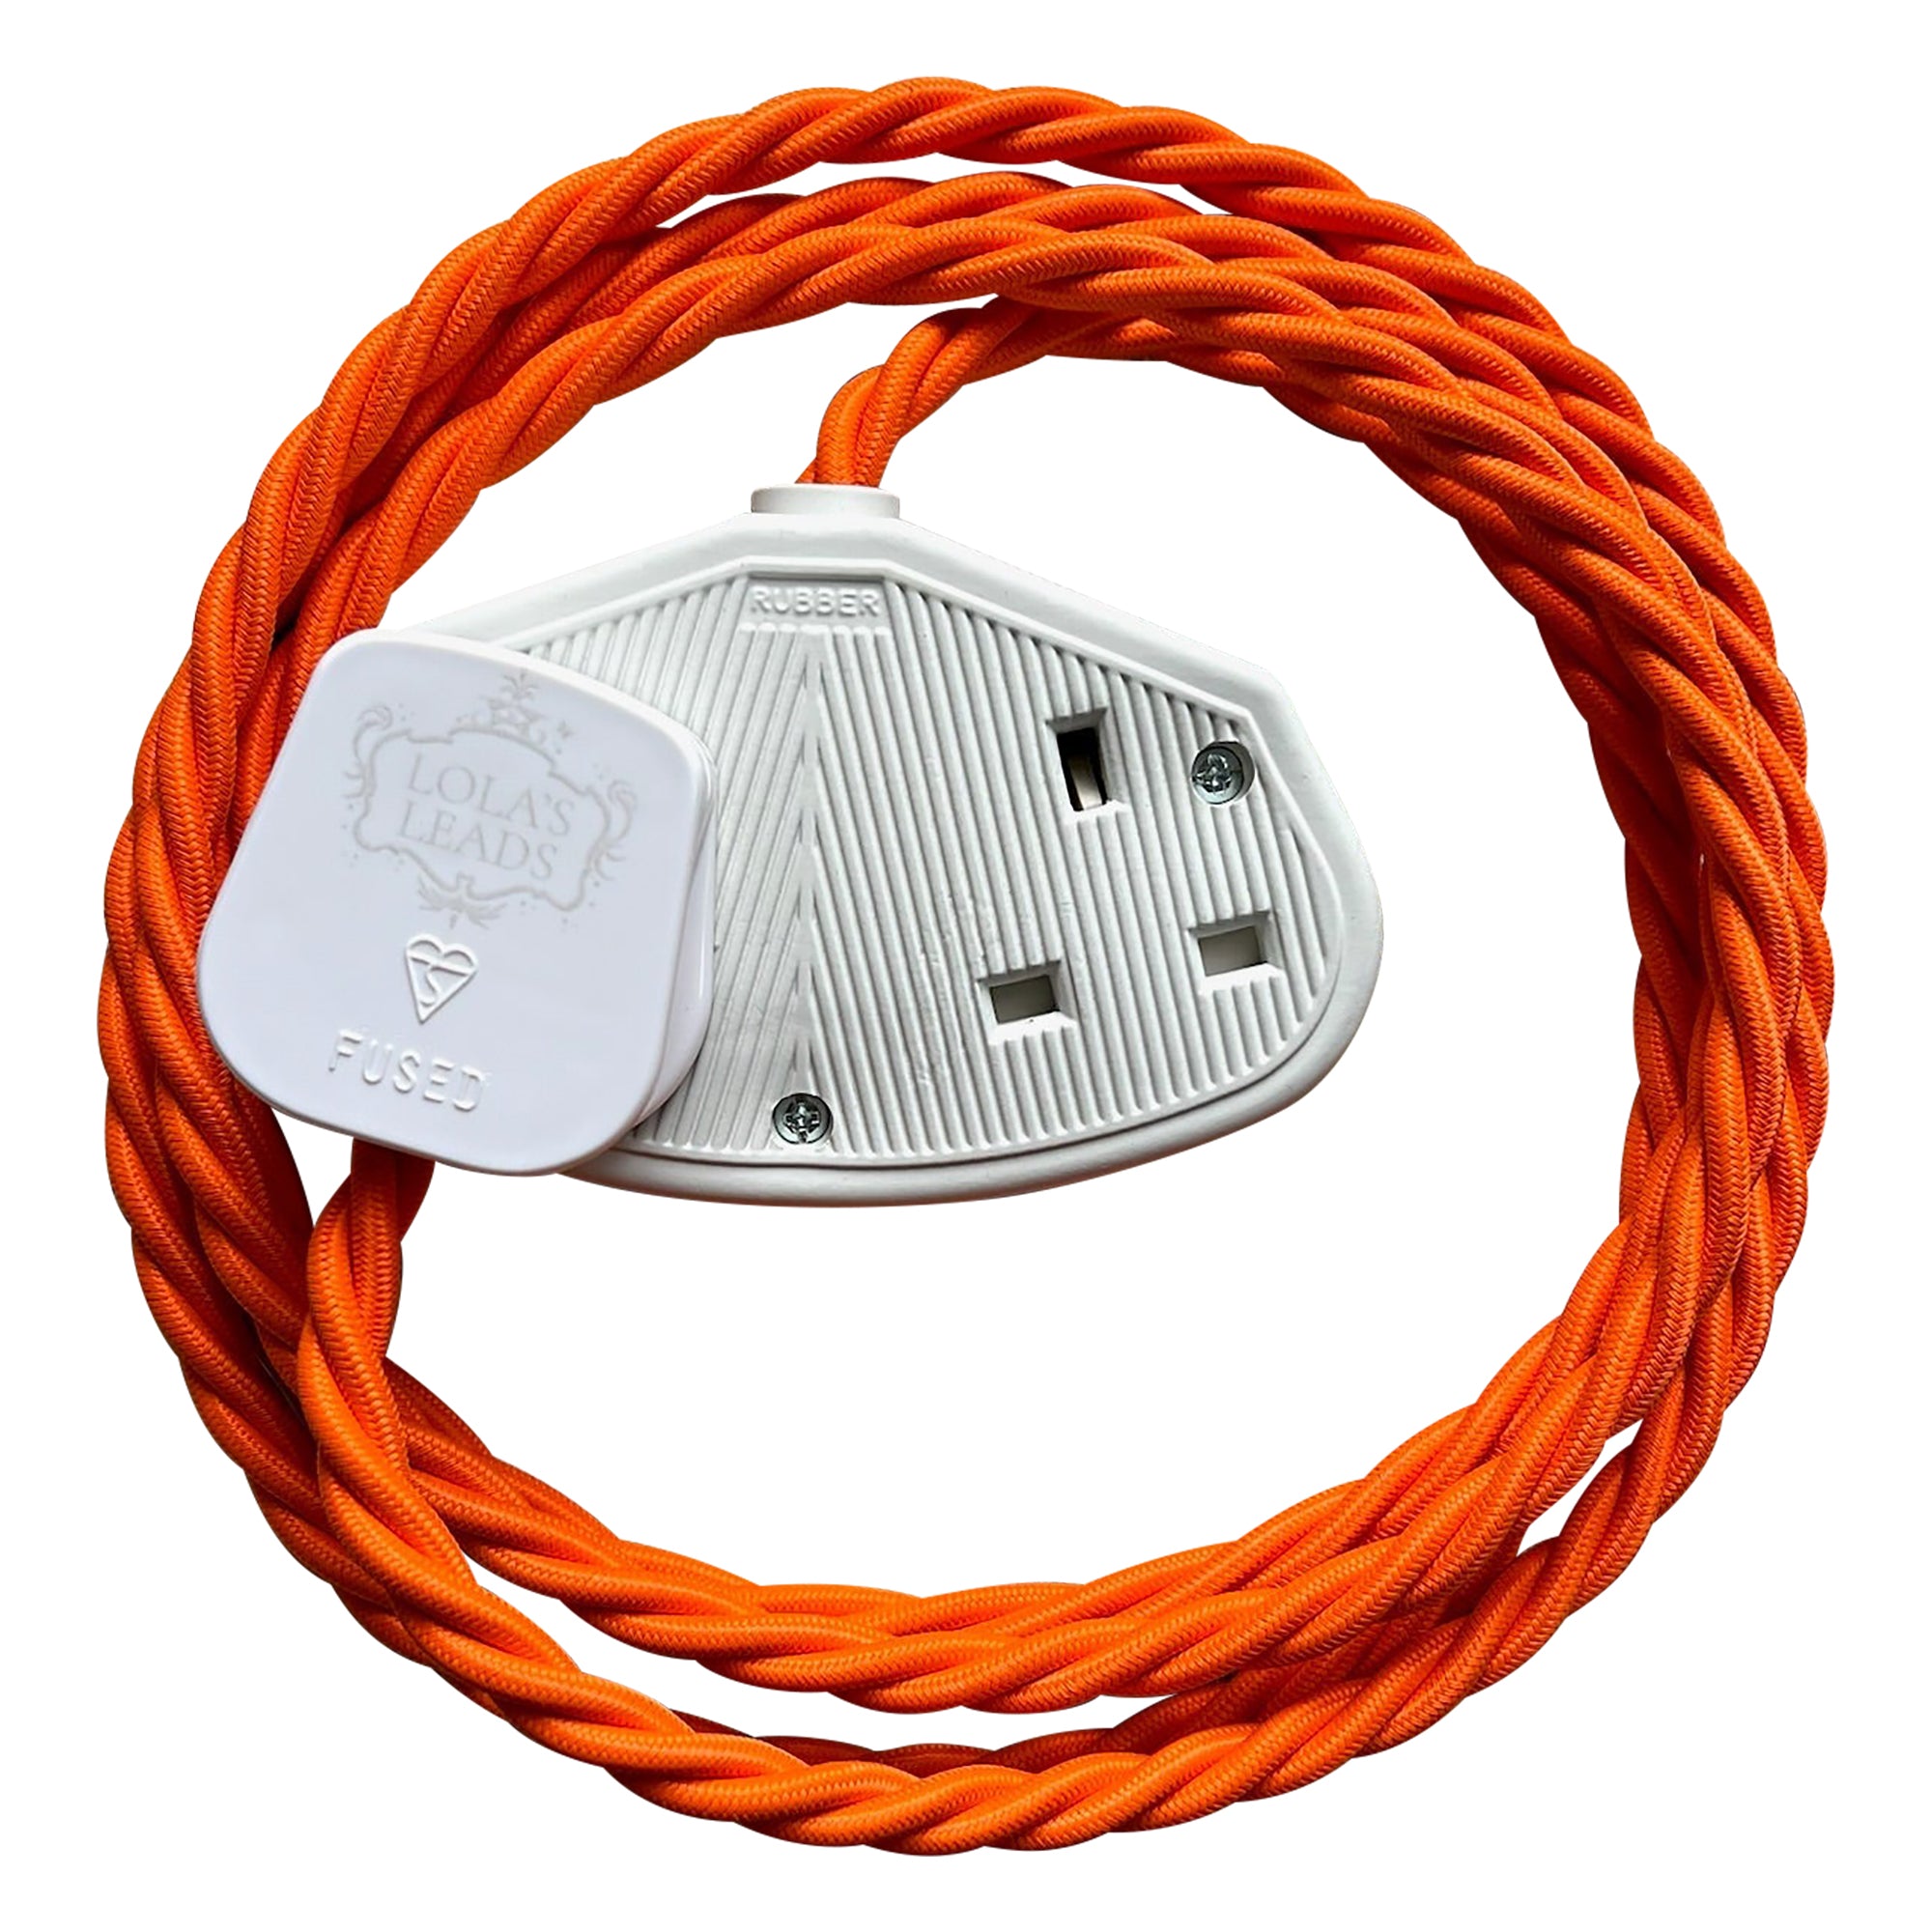 Pumpkin - Lola's Leads Fabric Extension Cable